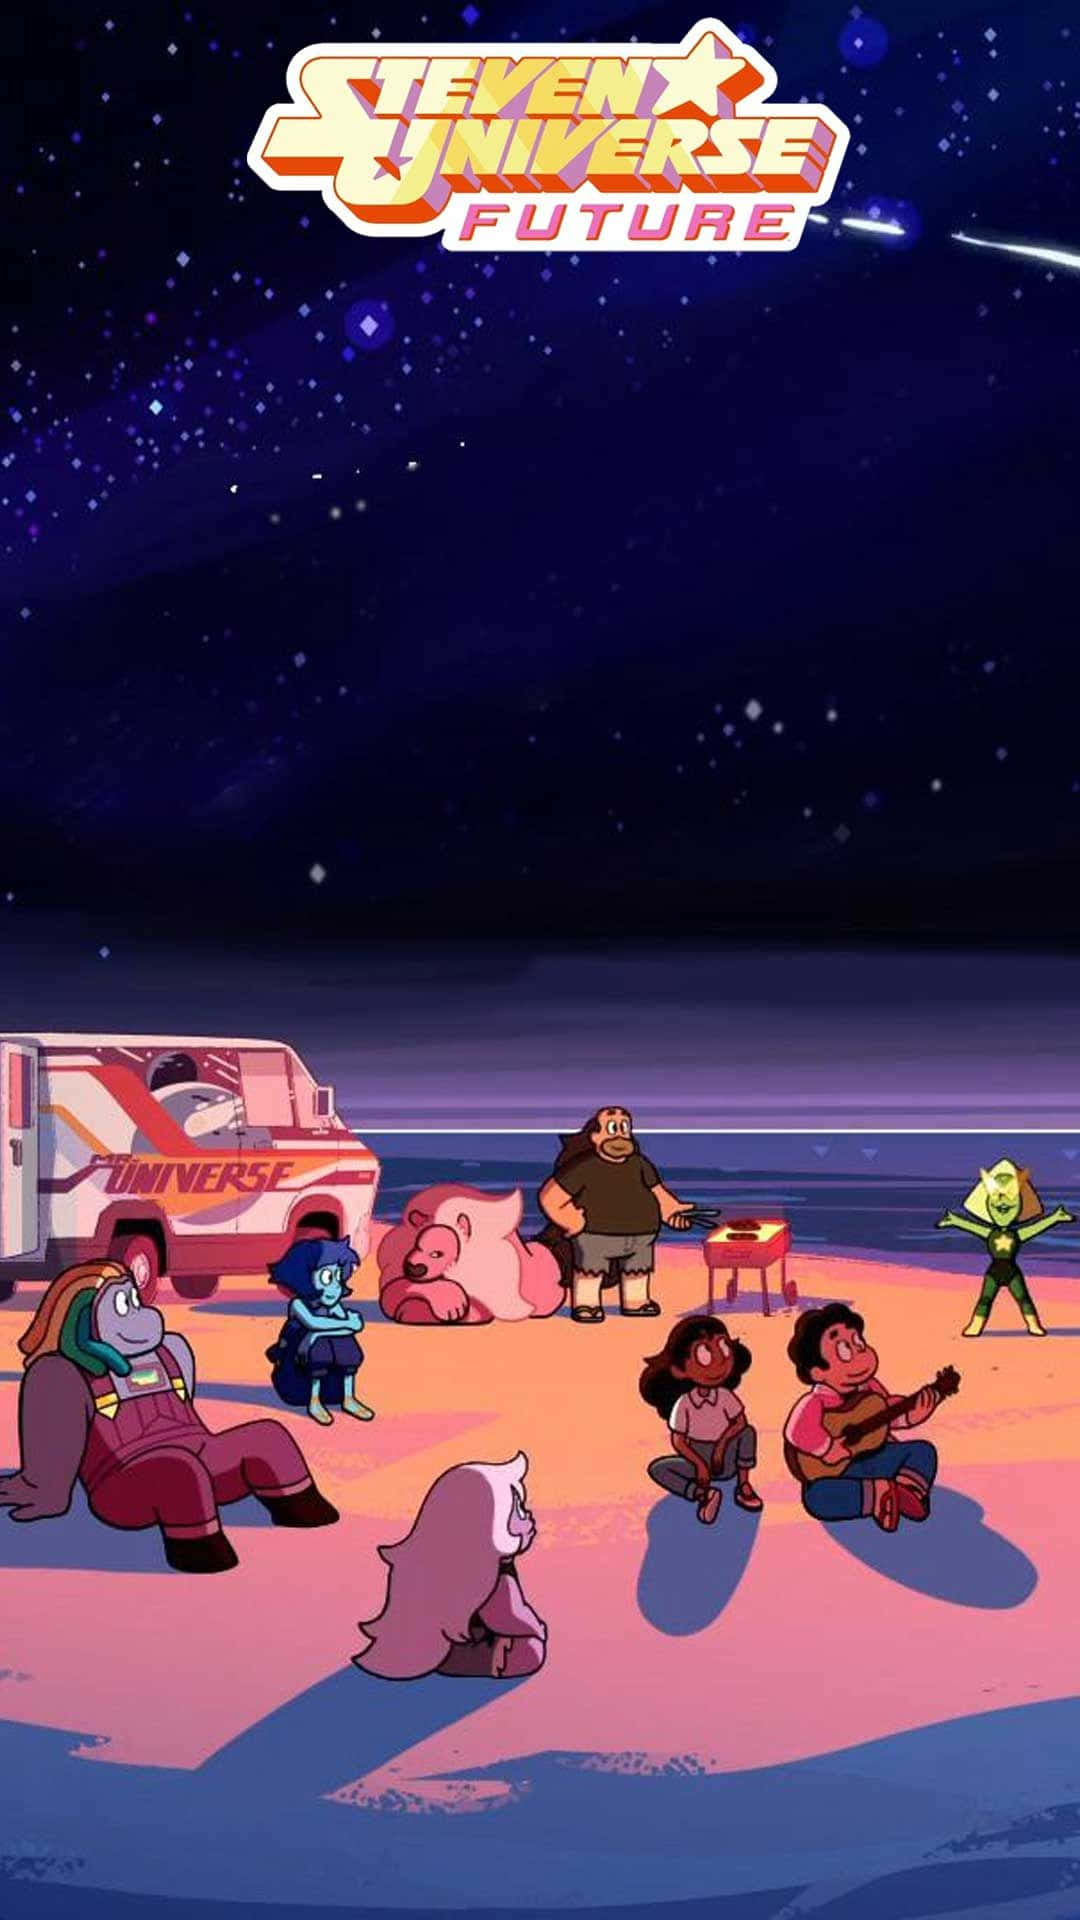 Personalize and customize your phone with Steven Universe wallpapers Wallpaper